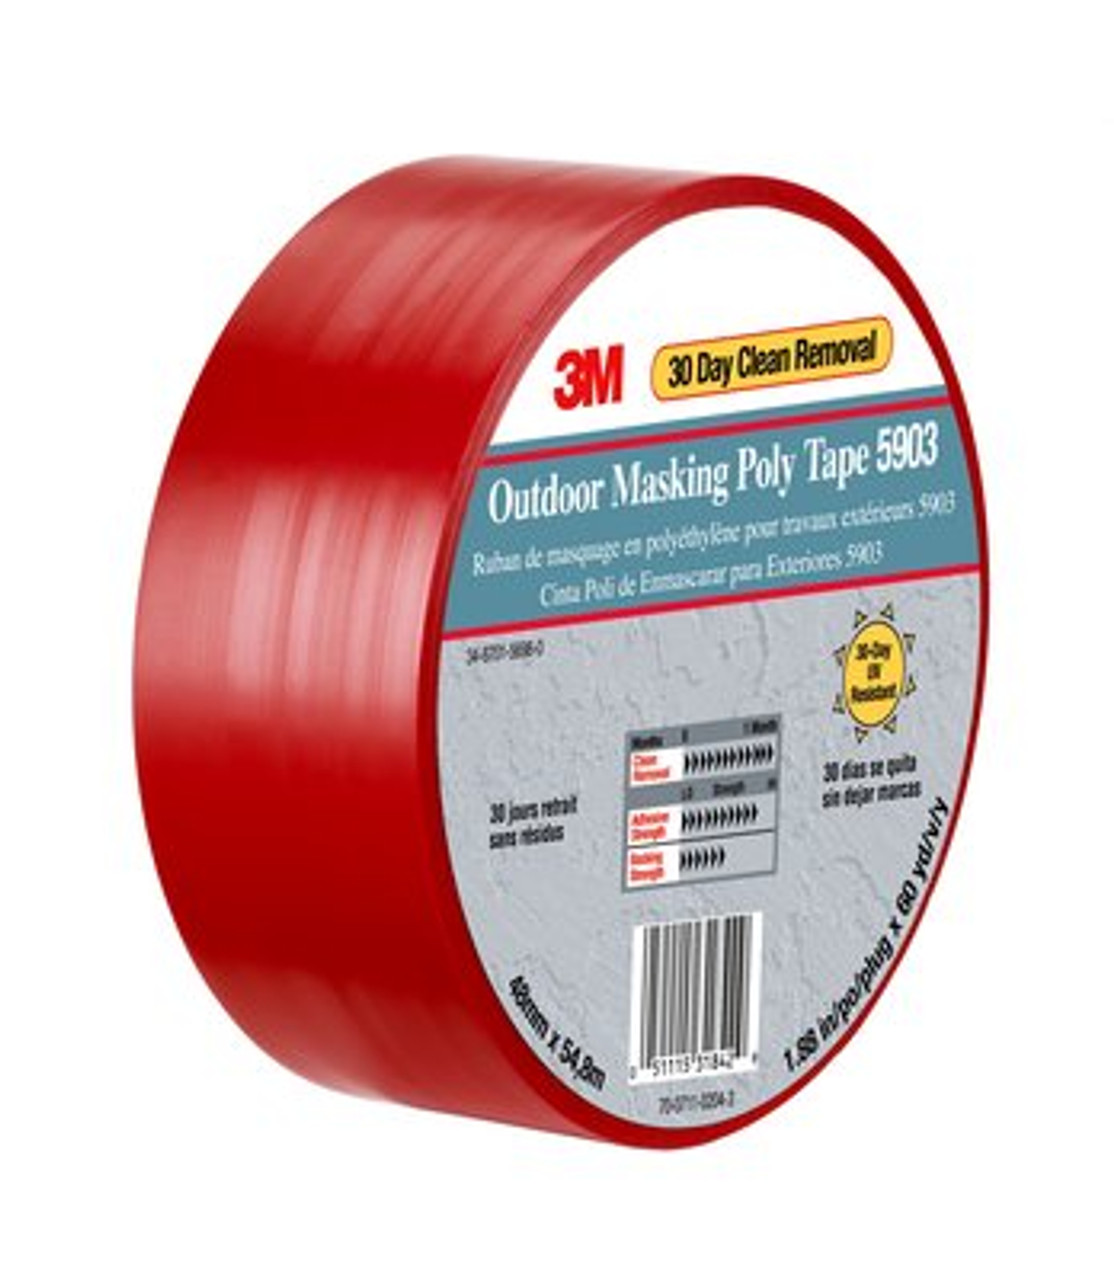 3M™ Outdoor Masking Poly Tape 5903, Red, 50 in x 60 yd